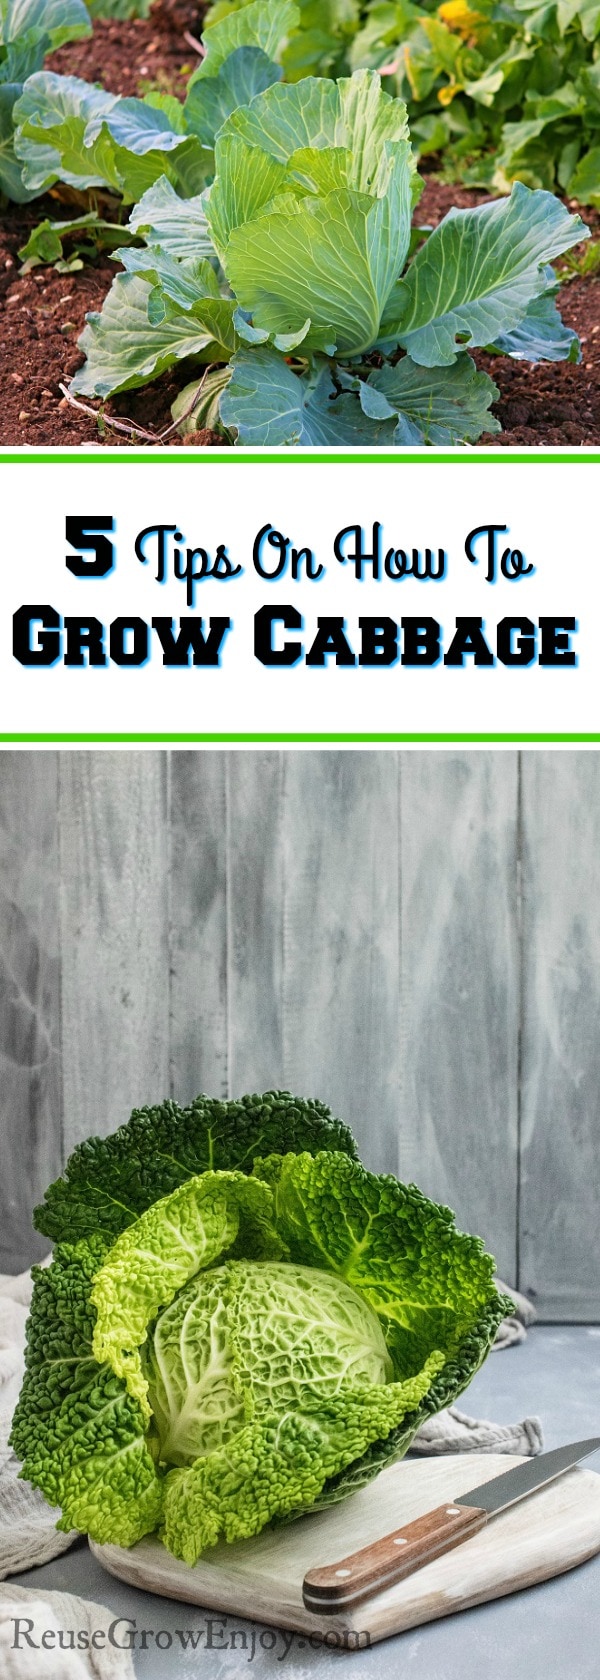 Thinking about growing cabbage in your garden? I will share with you 5 tips on how to grow cabbage.